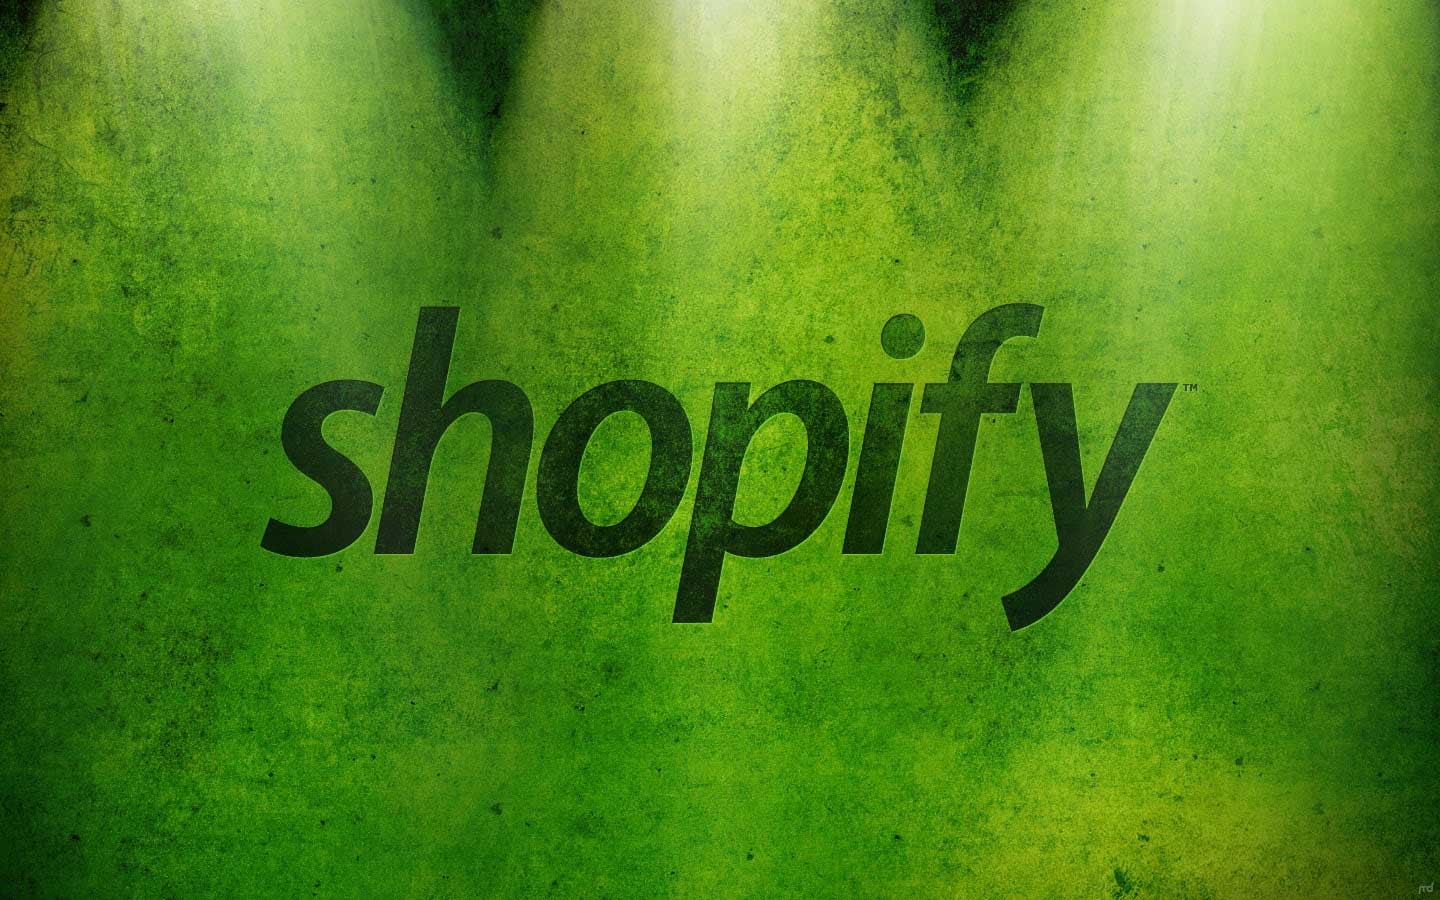 4 Reasons Why Website Development on Shopify is The Best Choice